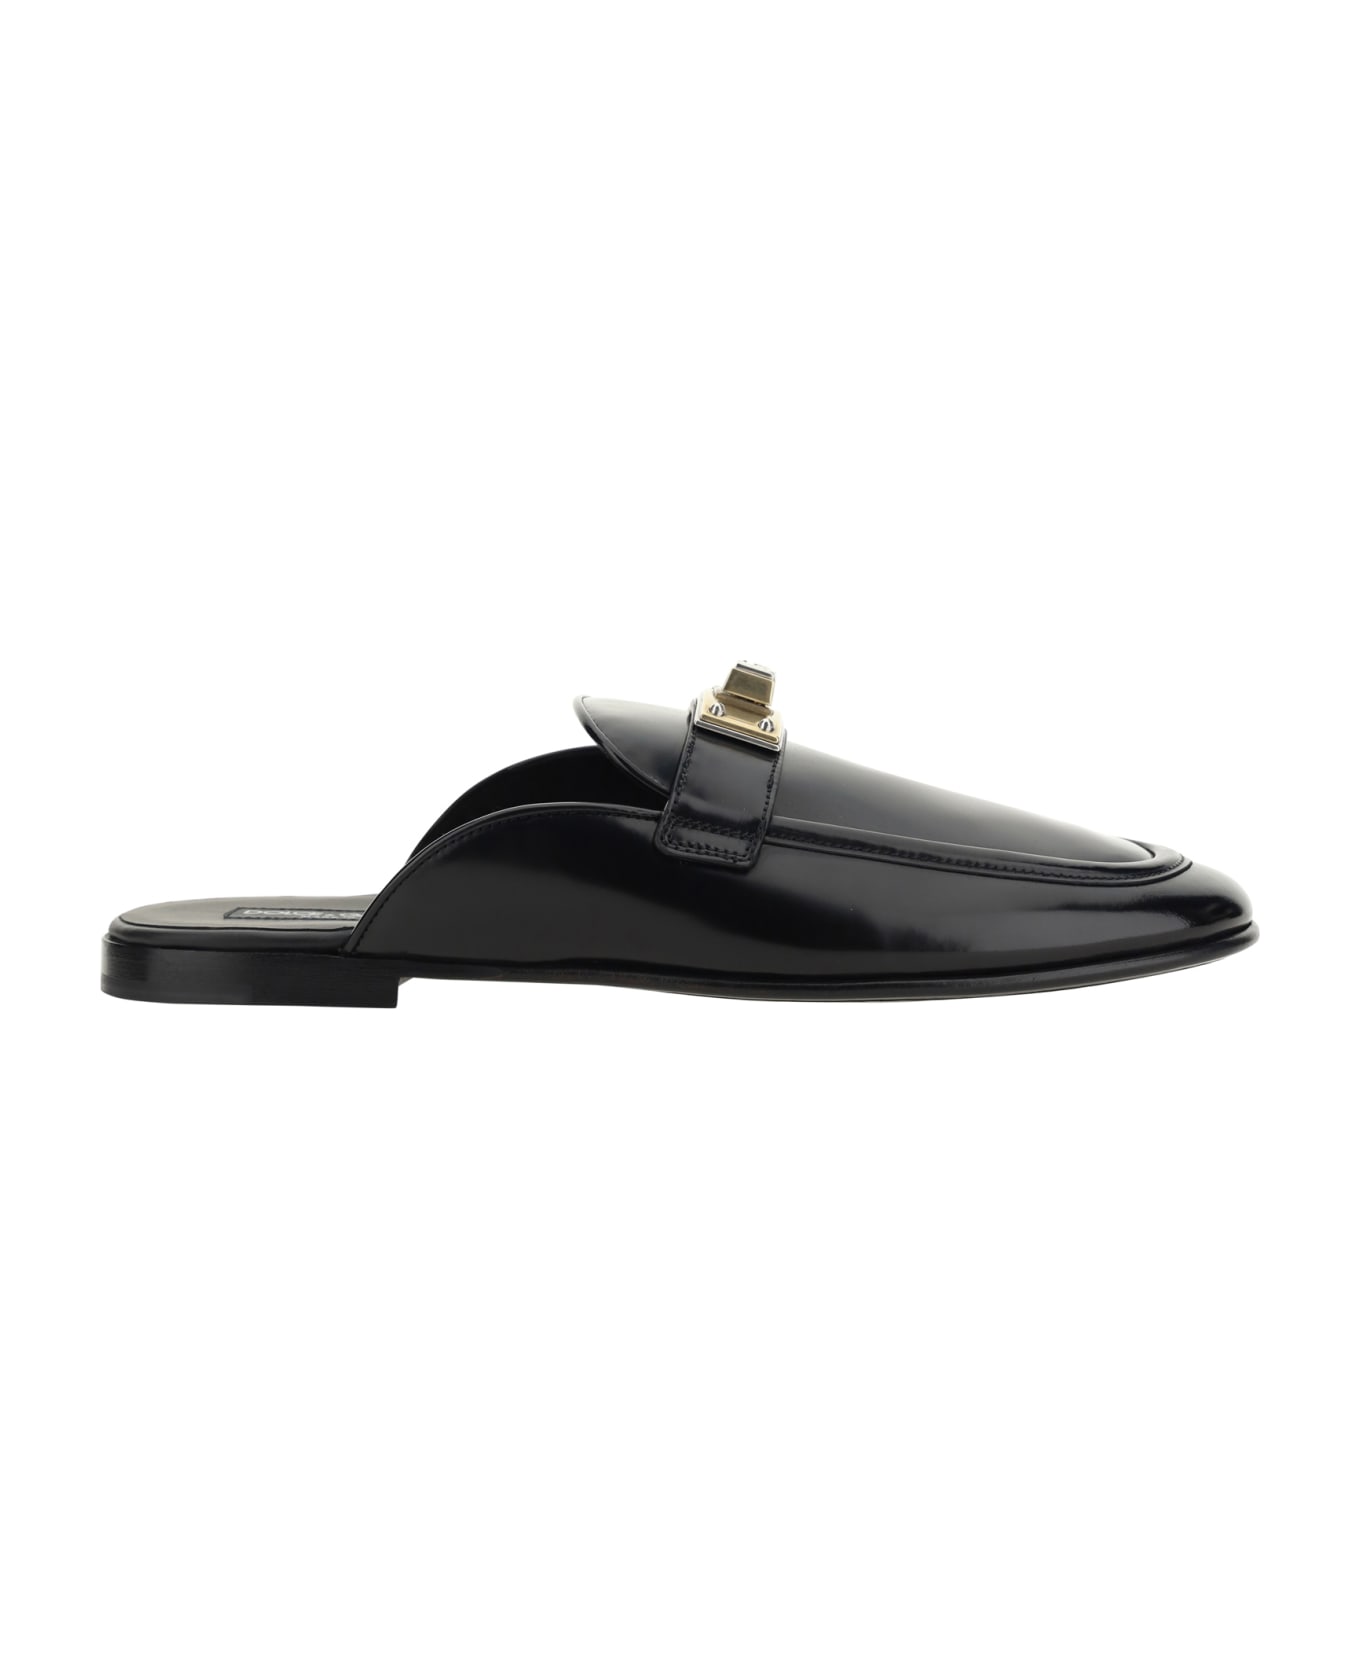 Dolce & Gabbana Loafers Mule - Nero その他各種シューズ